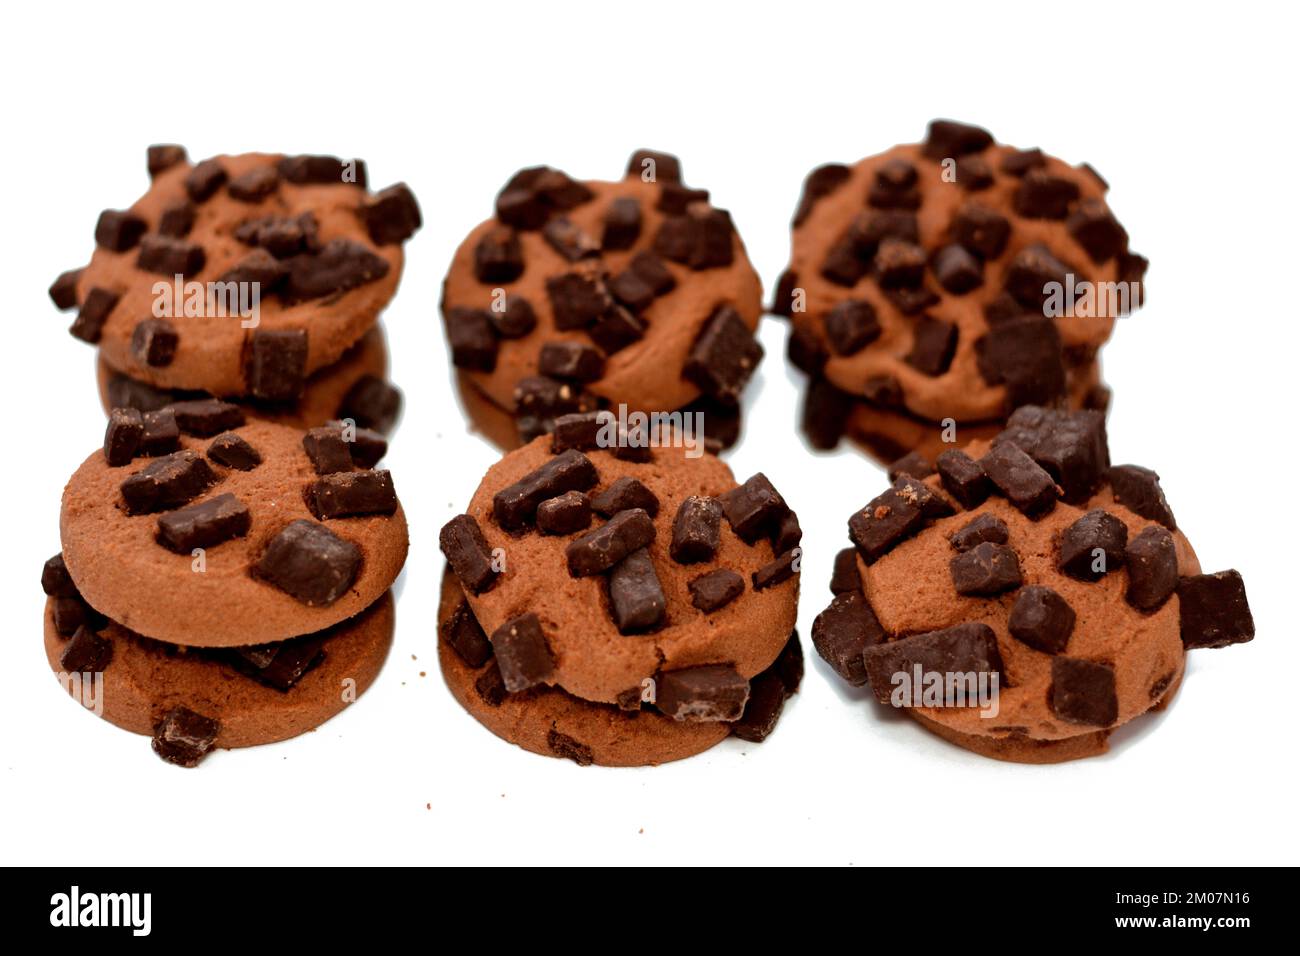 Fresh baked chocolate chip cookies with chocolate pieces, traditional chocolate chip cookies with chunks isolated, delicious pastries with choco chips Stock Photo